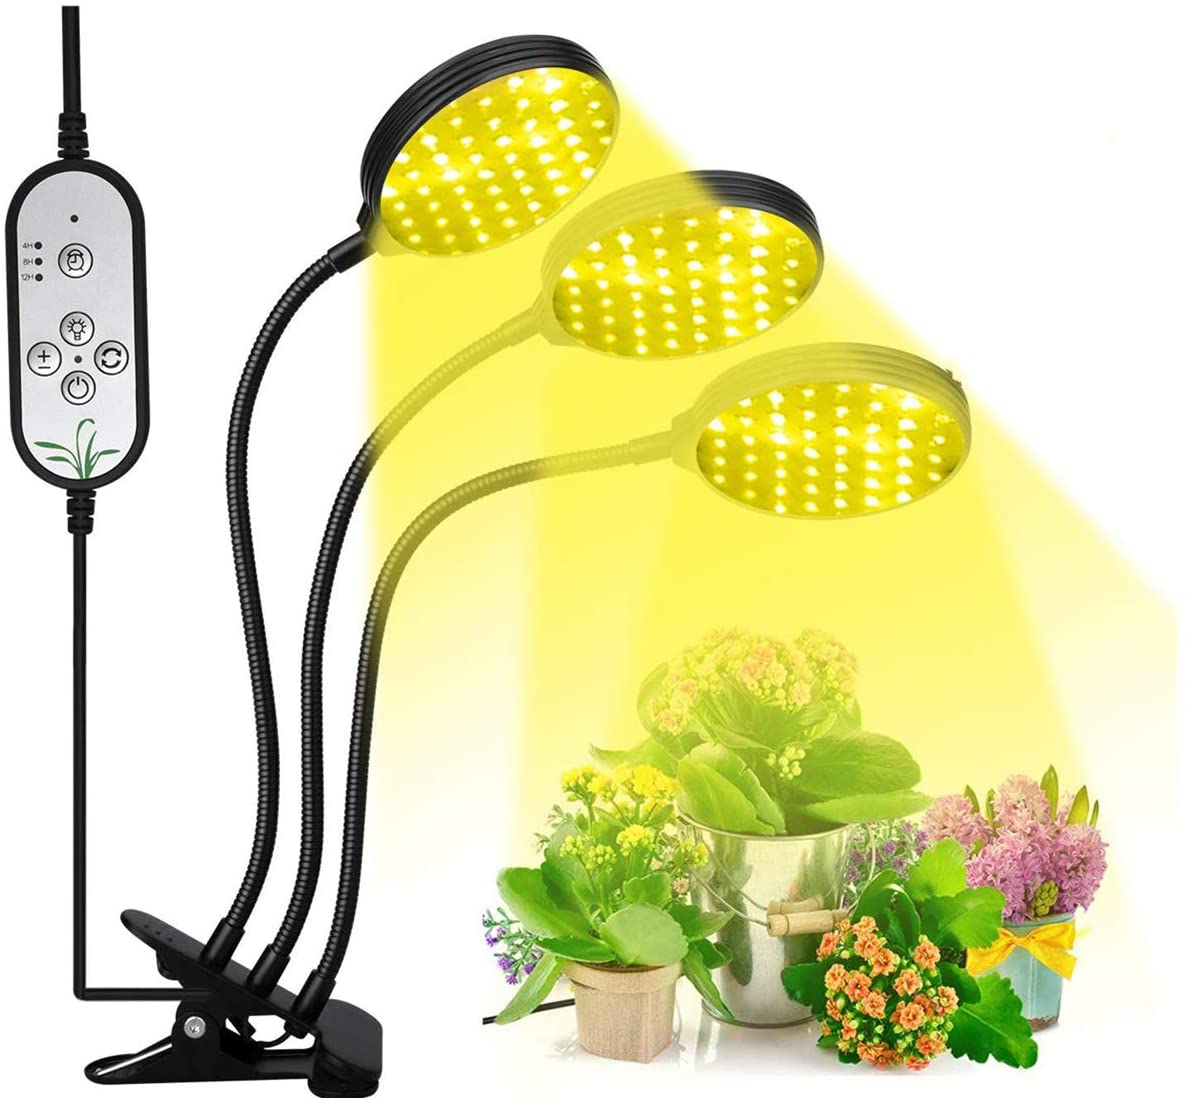 INDOOR Grow Light for plants LED lamp bulbs full Spectrum with 3 heads.